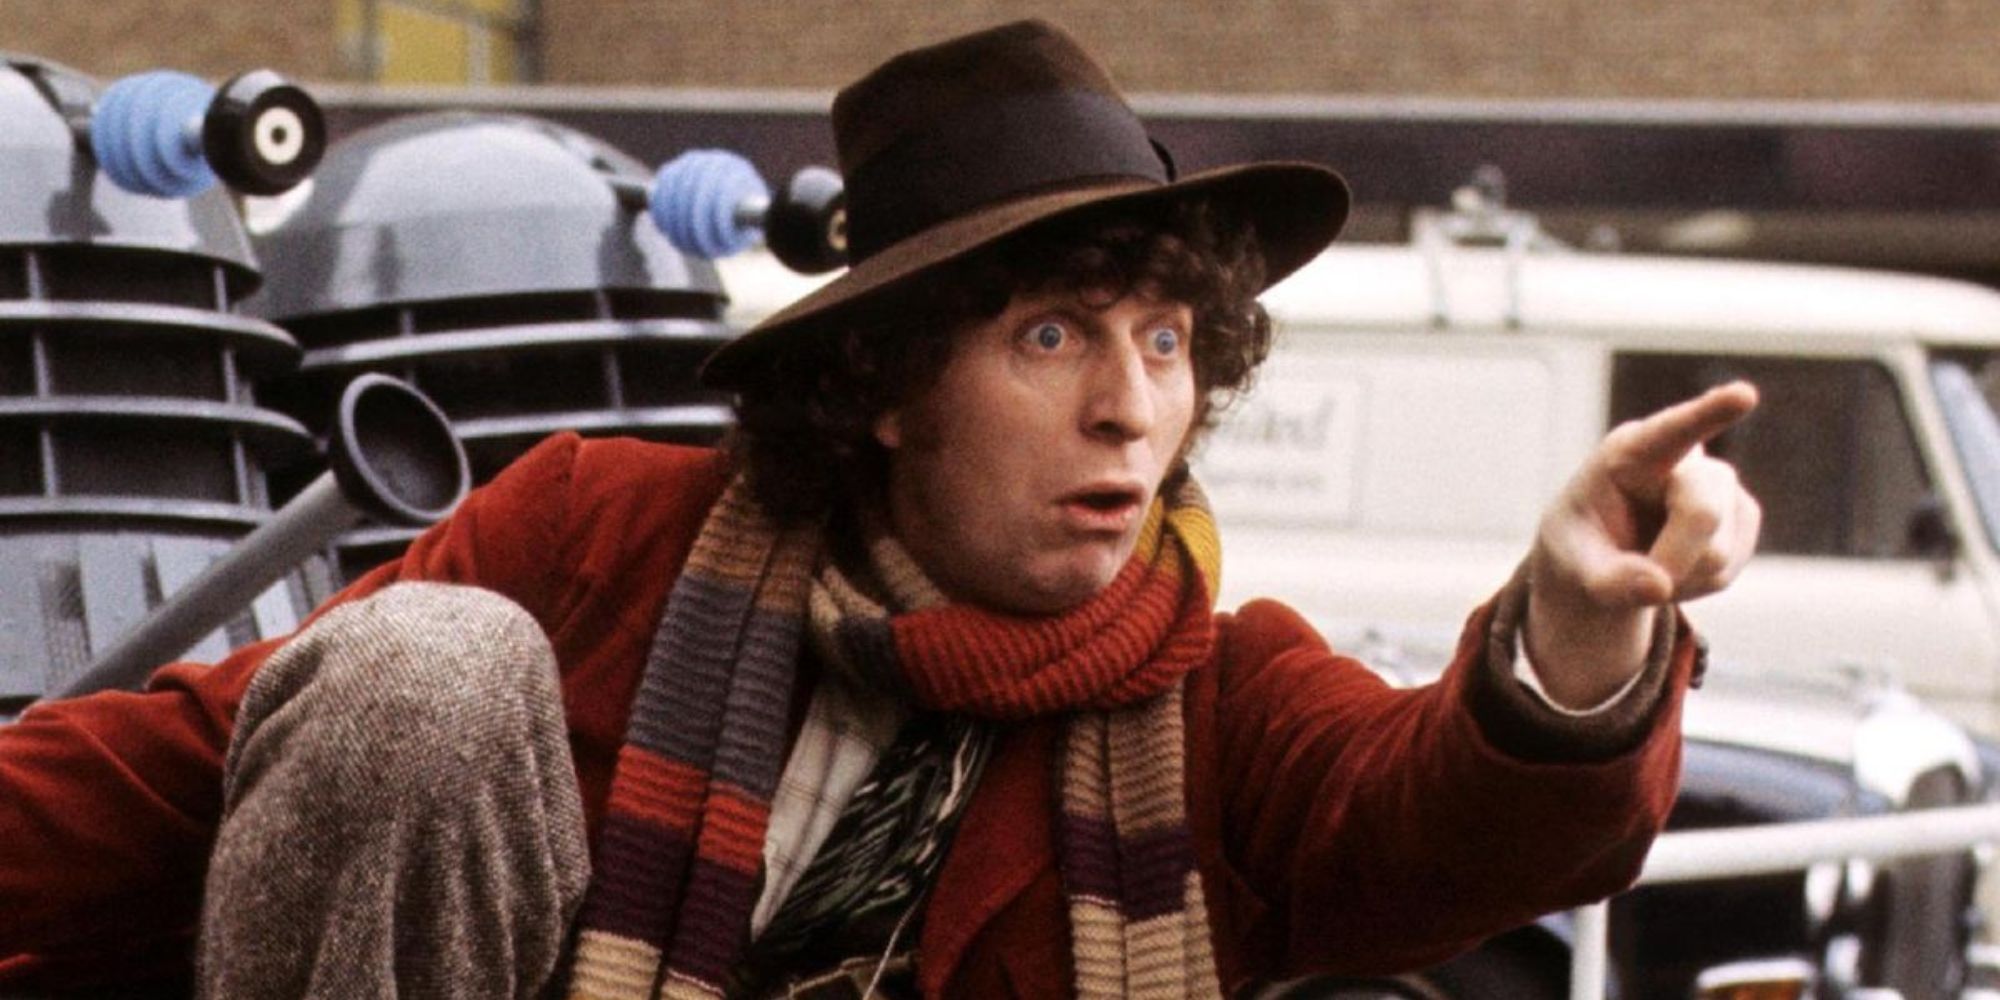 4th Doctor pointing while surrounded by Daleks